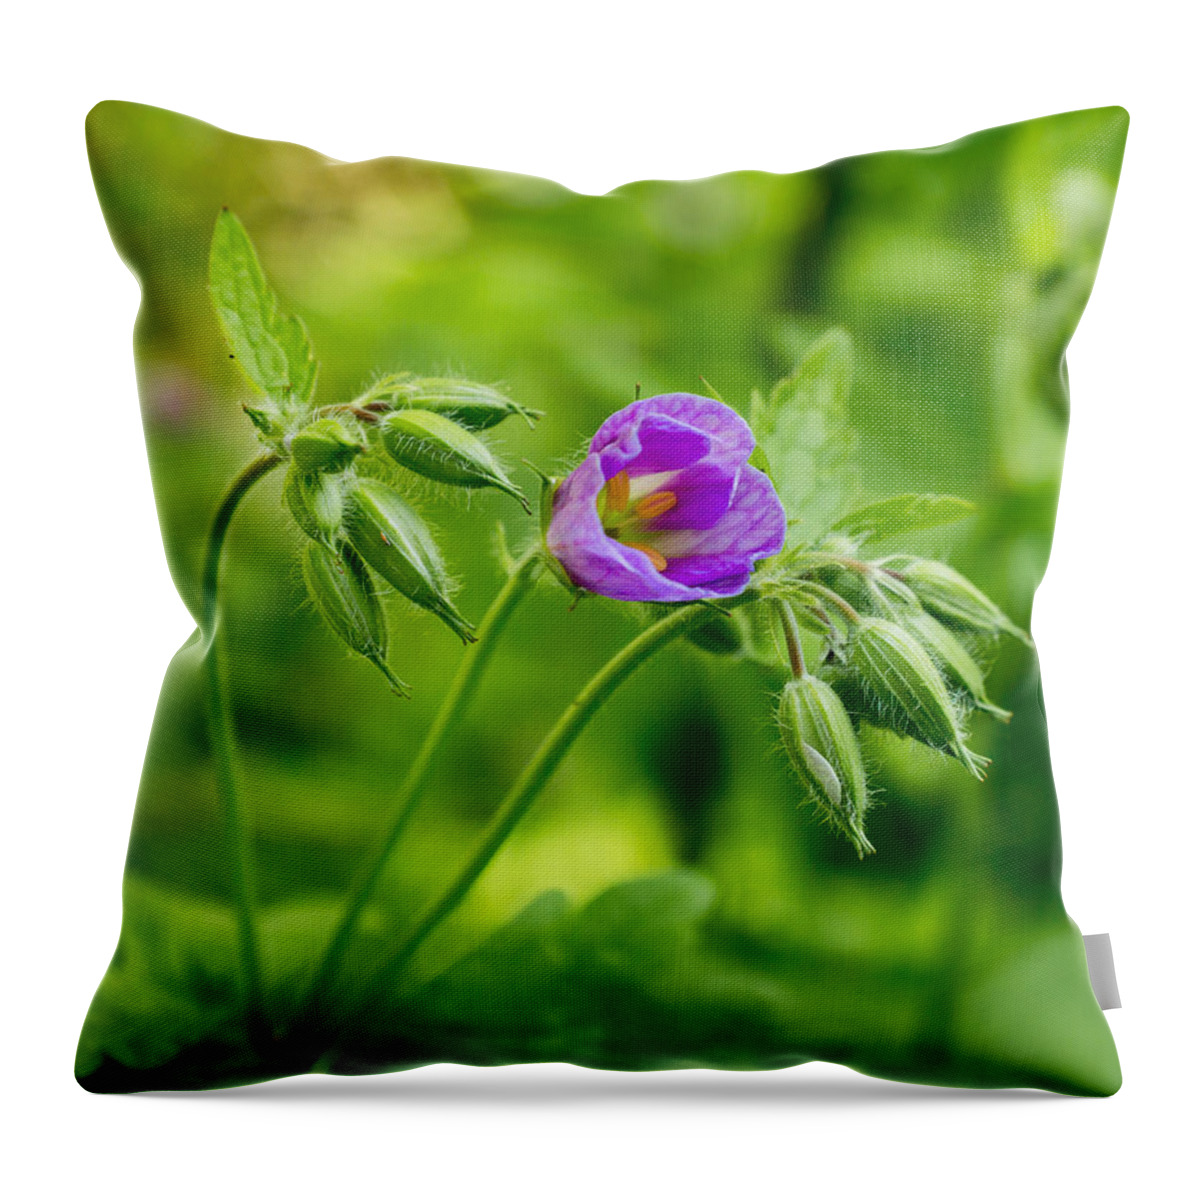 Wildflower Throw Pillow featuring the photograph Budding Artist by Bill Pevlor